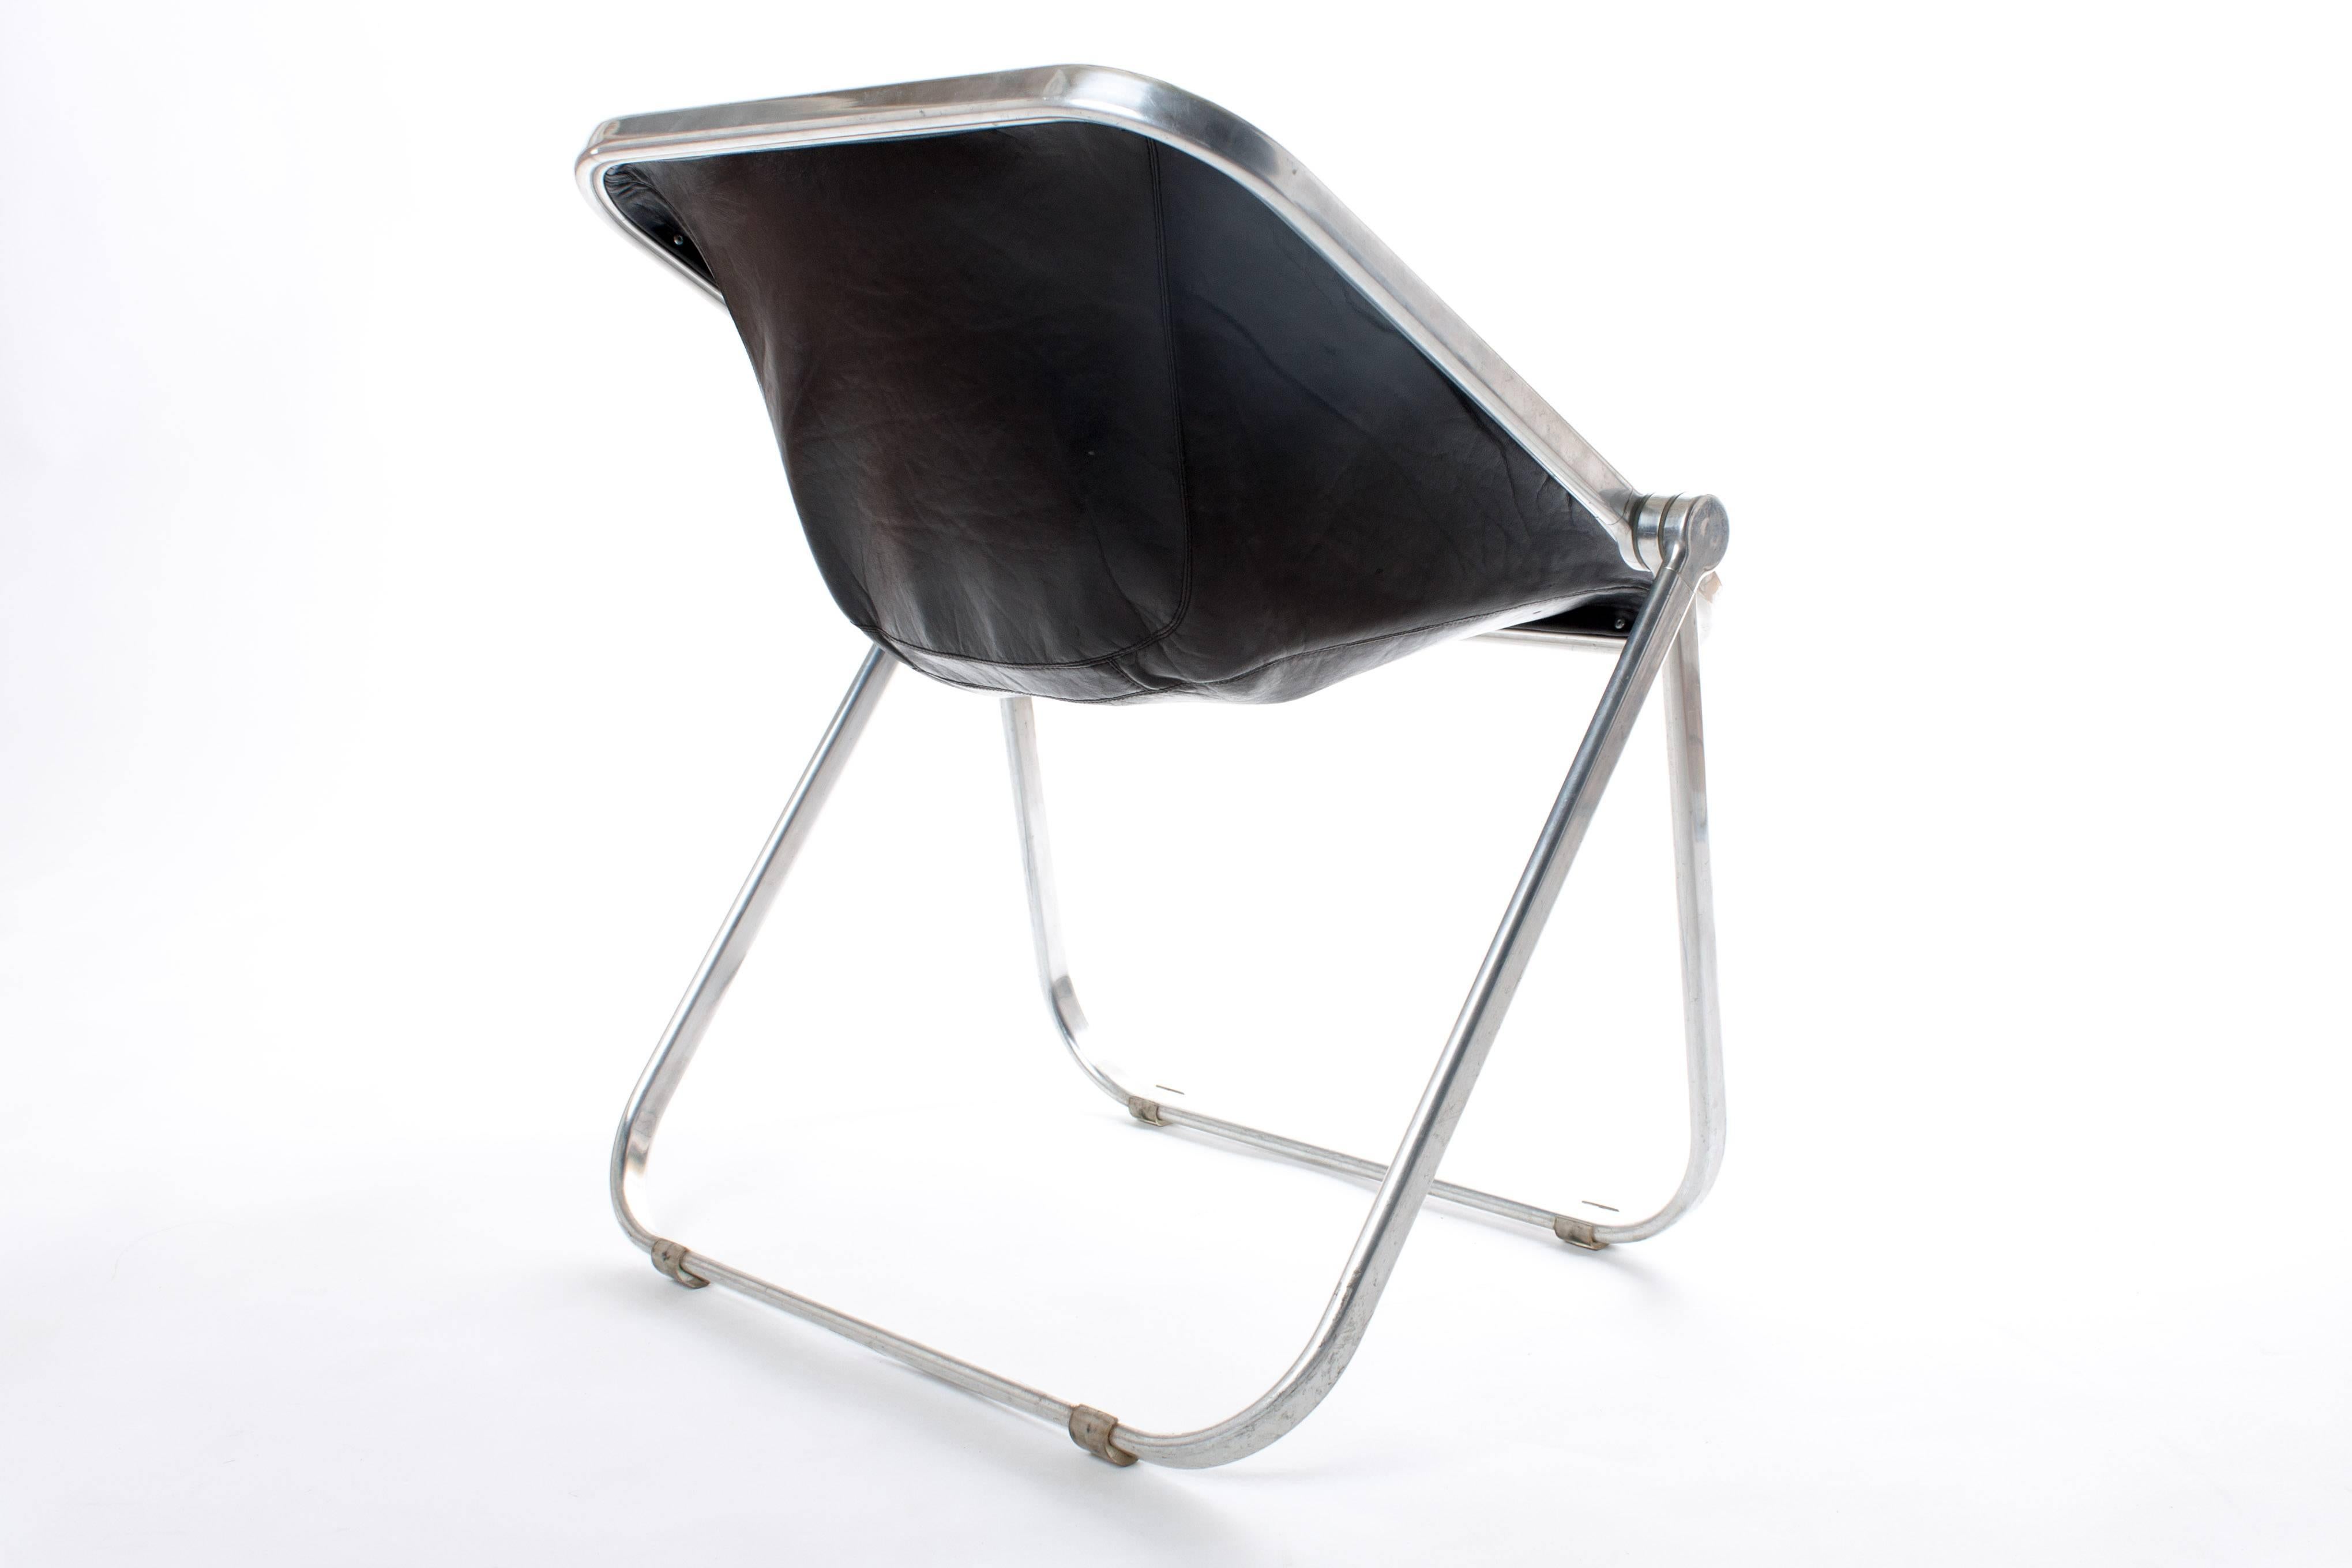 Mid-20th Century PLONA FOLDING CHAIR of Piretti for Castelli, 1969 in black leather